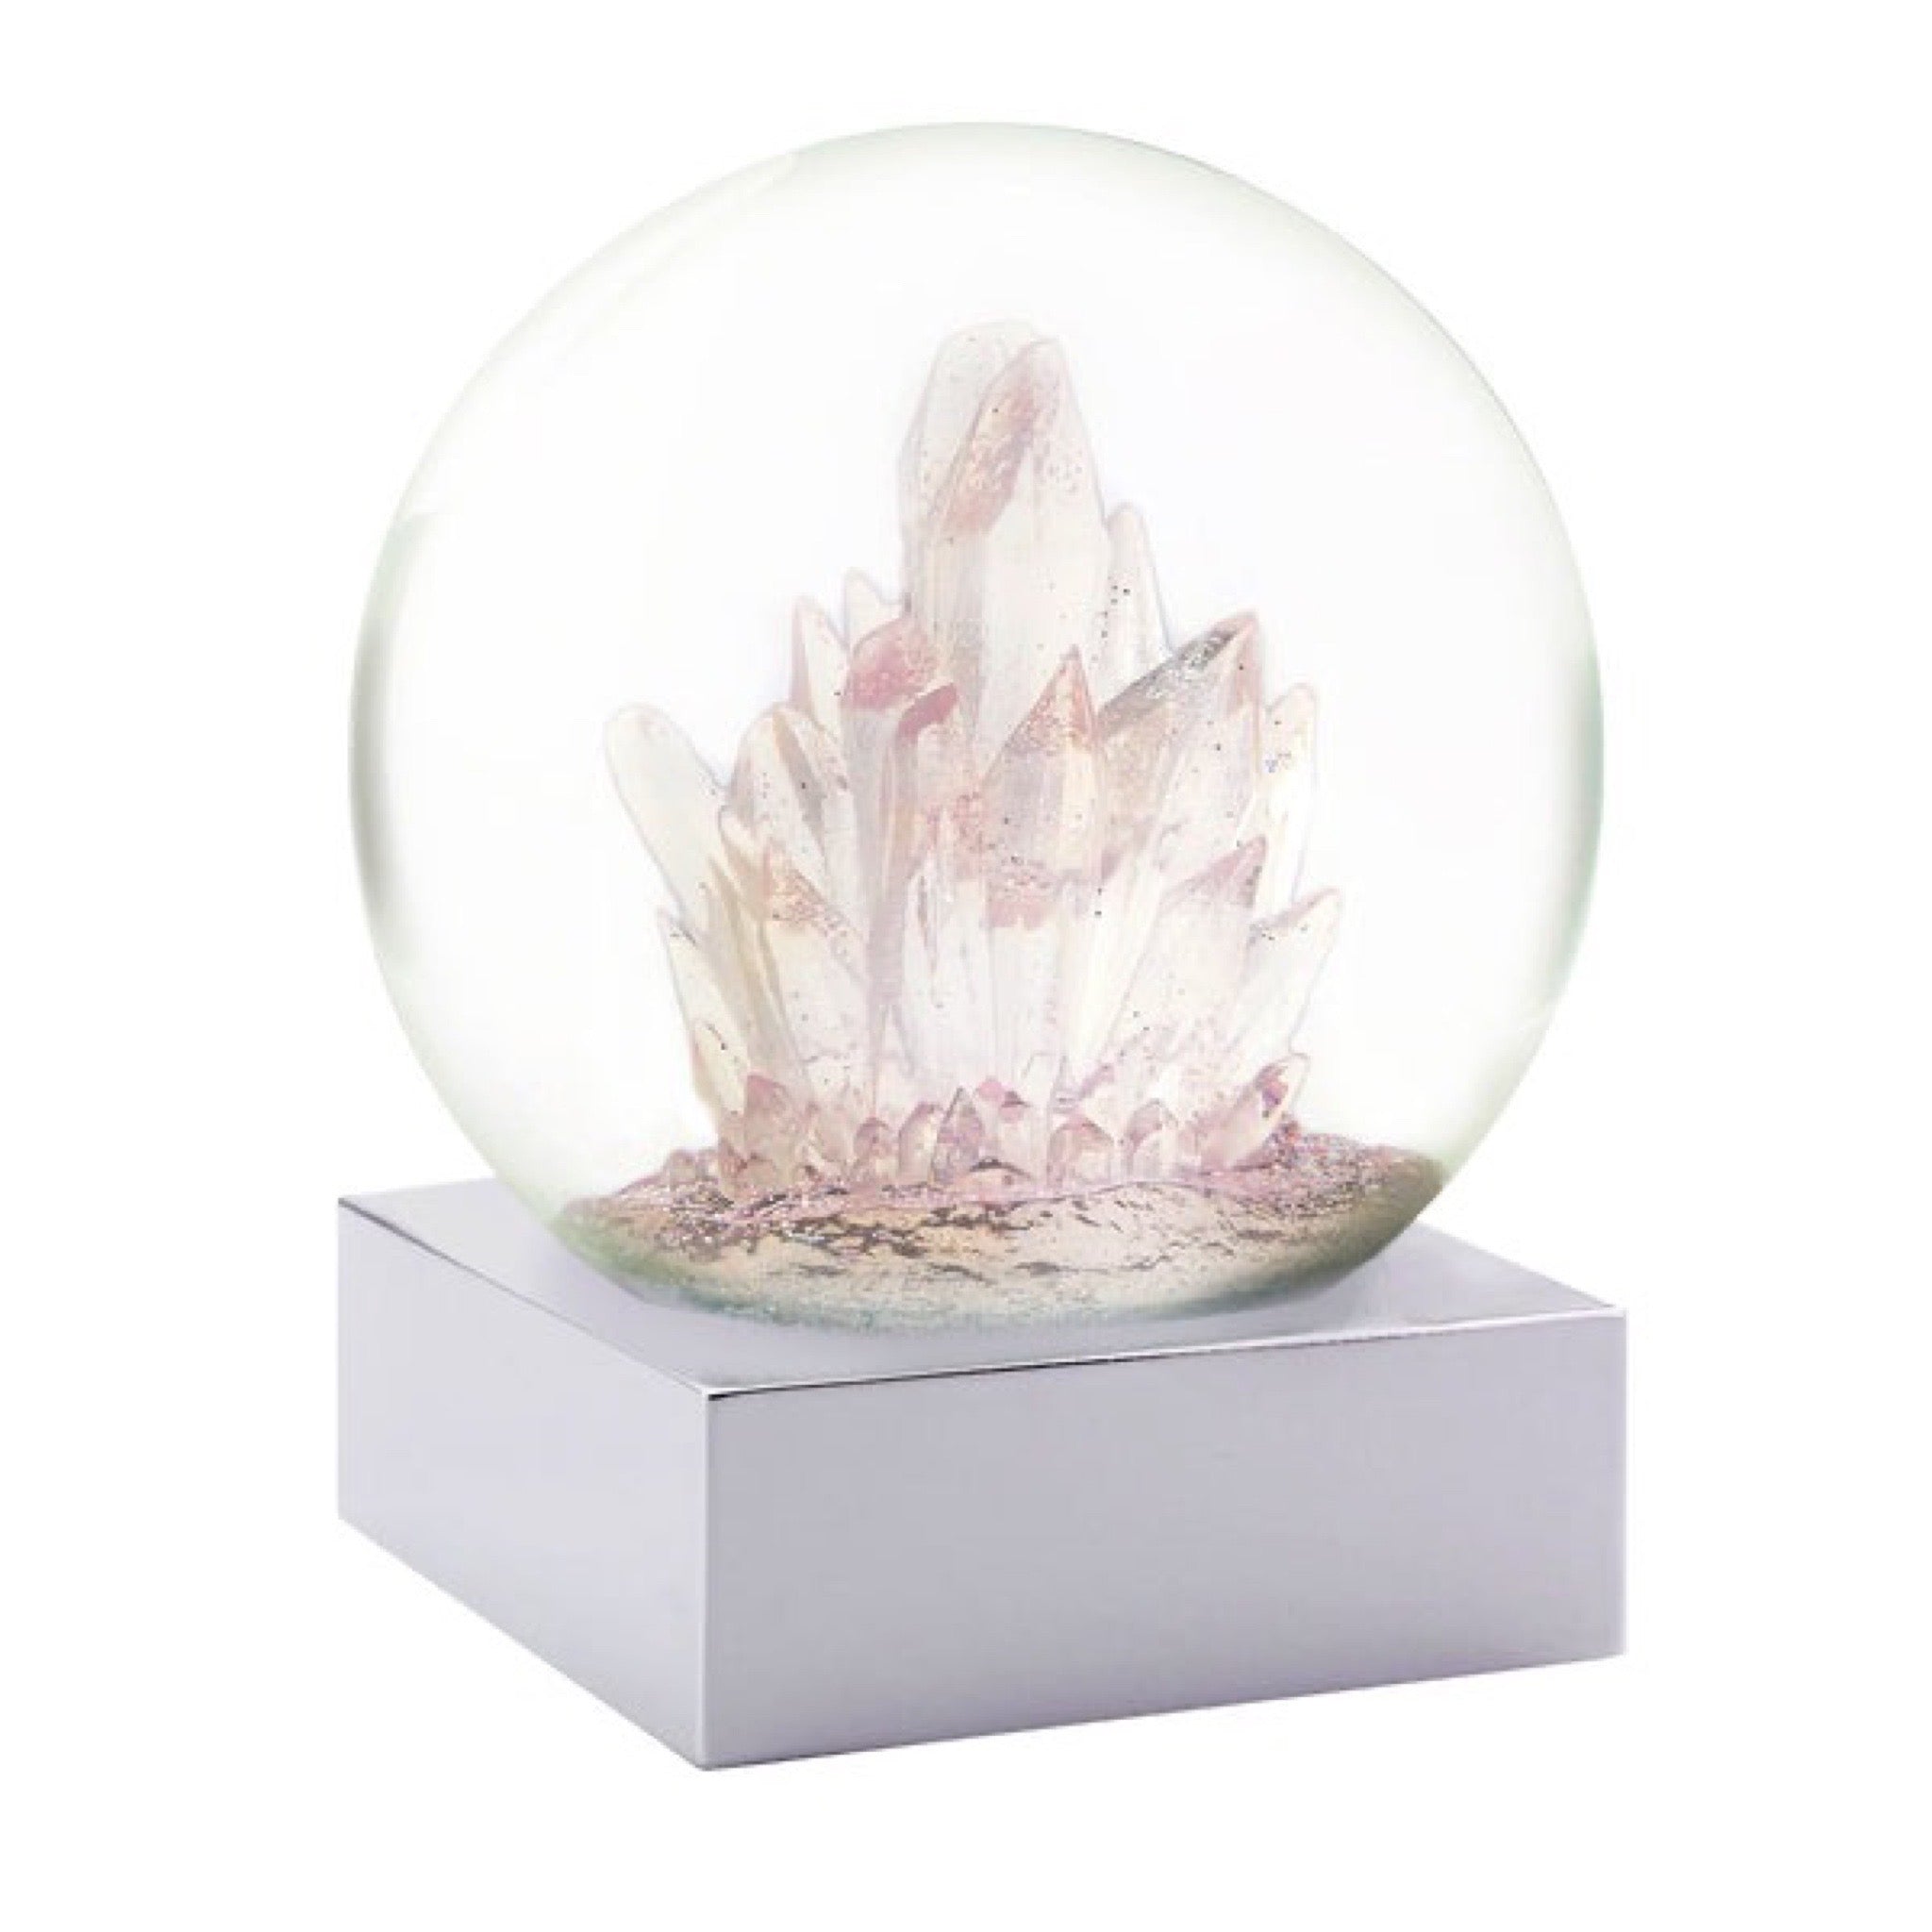 Cool Snow Globes Rose Quartz Crystal Snow Globe available at Shaylula Jewlery & Gifts in Tarrytown, NY and online. Often called the "love stone," rose quartz is said to bring peace, calm, emotional balance and stress relief - things we can all benefit from. Take a moment to gaze into our soothing water globe modeled from actual crystal formations showered in silver light..  • 4.5" H x 4" D